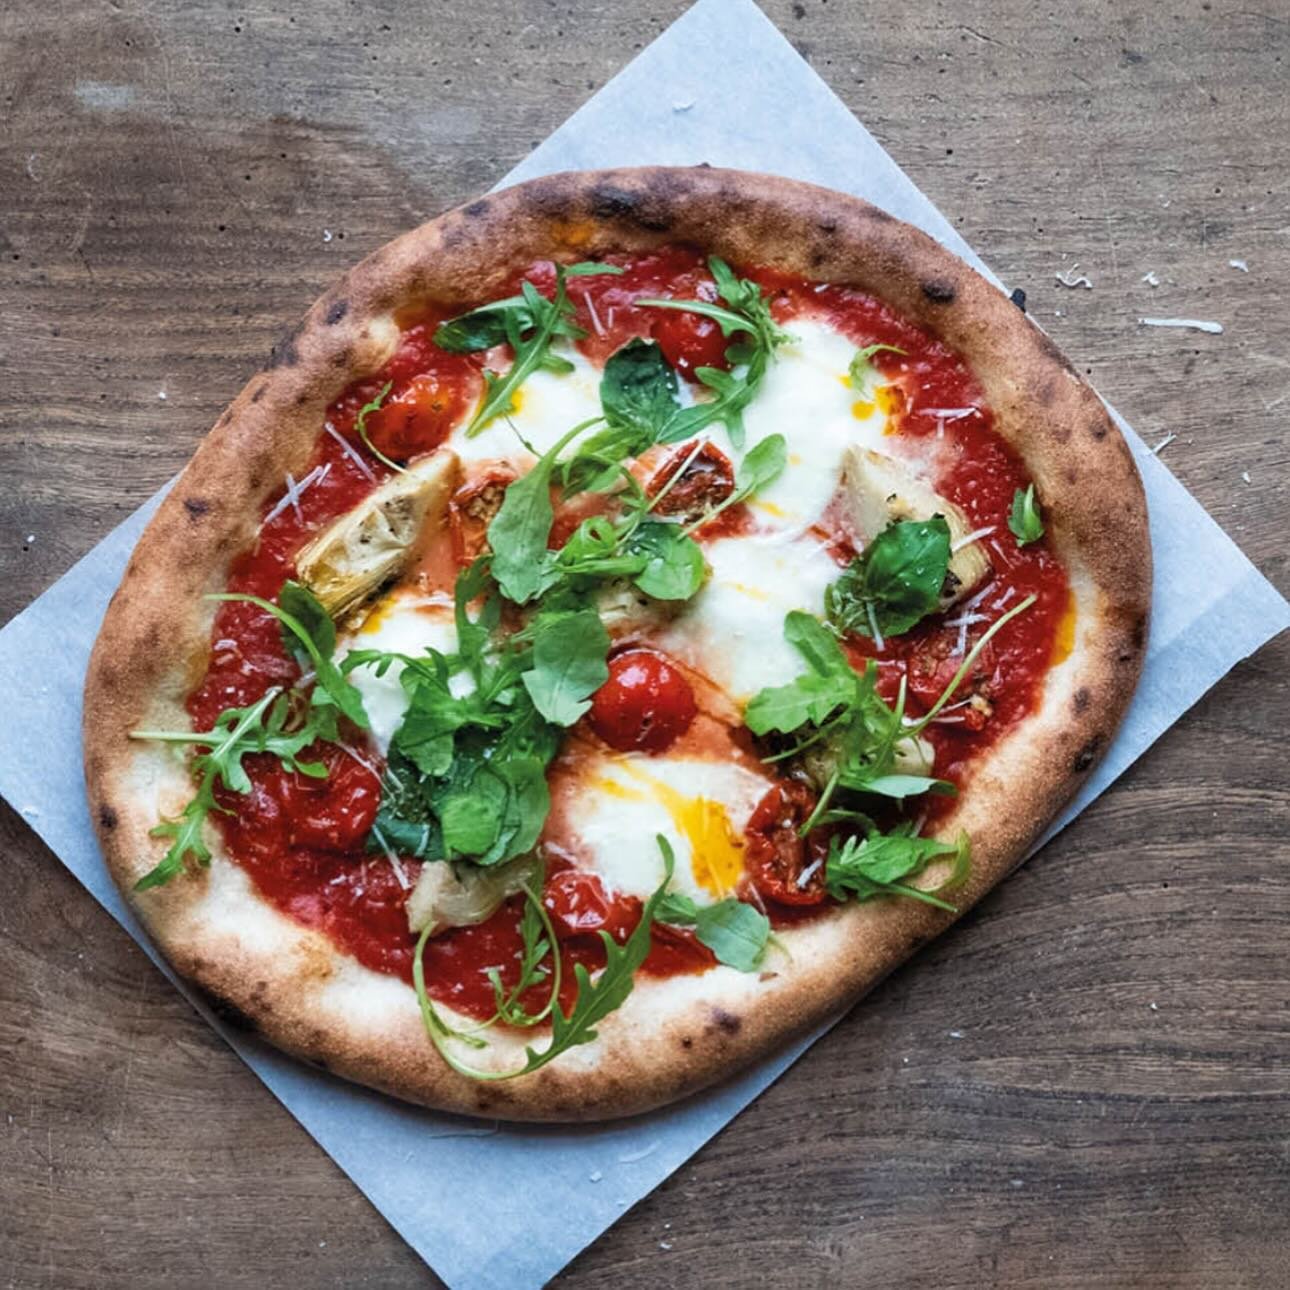 FRIDAY PIZZA NIGHT 🍕 We have restocked your favourite sourdough pizza dough, just head to the freezer! Made with just flour, water and salt; the sourdough starter gives a delicious depth of flavour. Cooking instructions below 👇

Defrost: Remove the